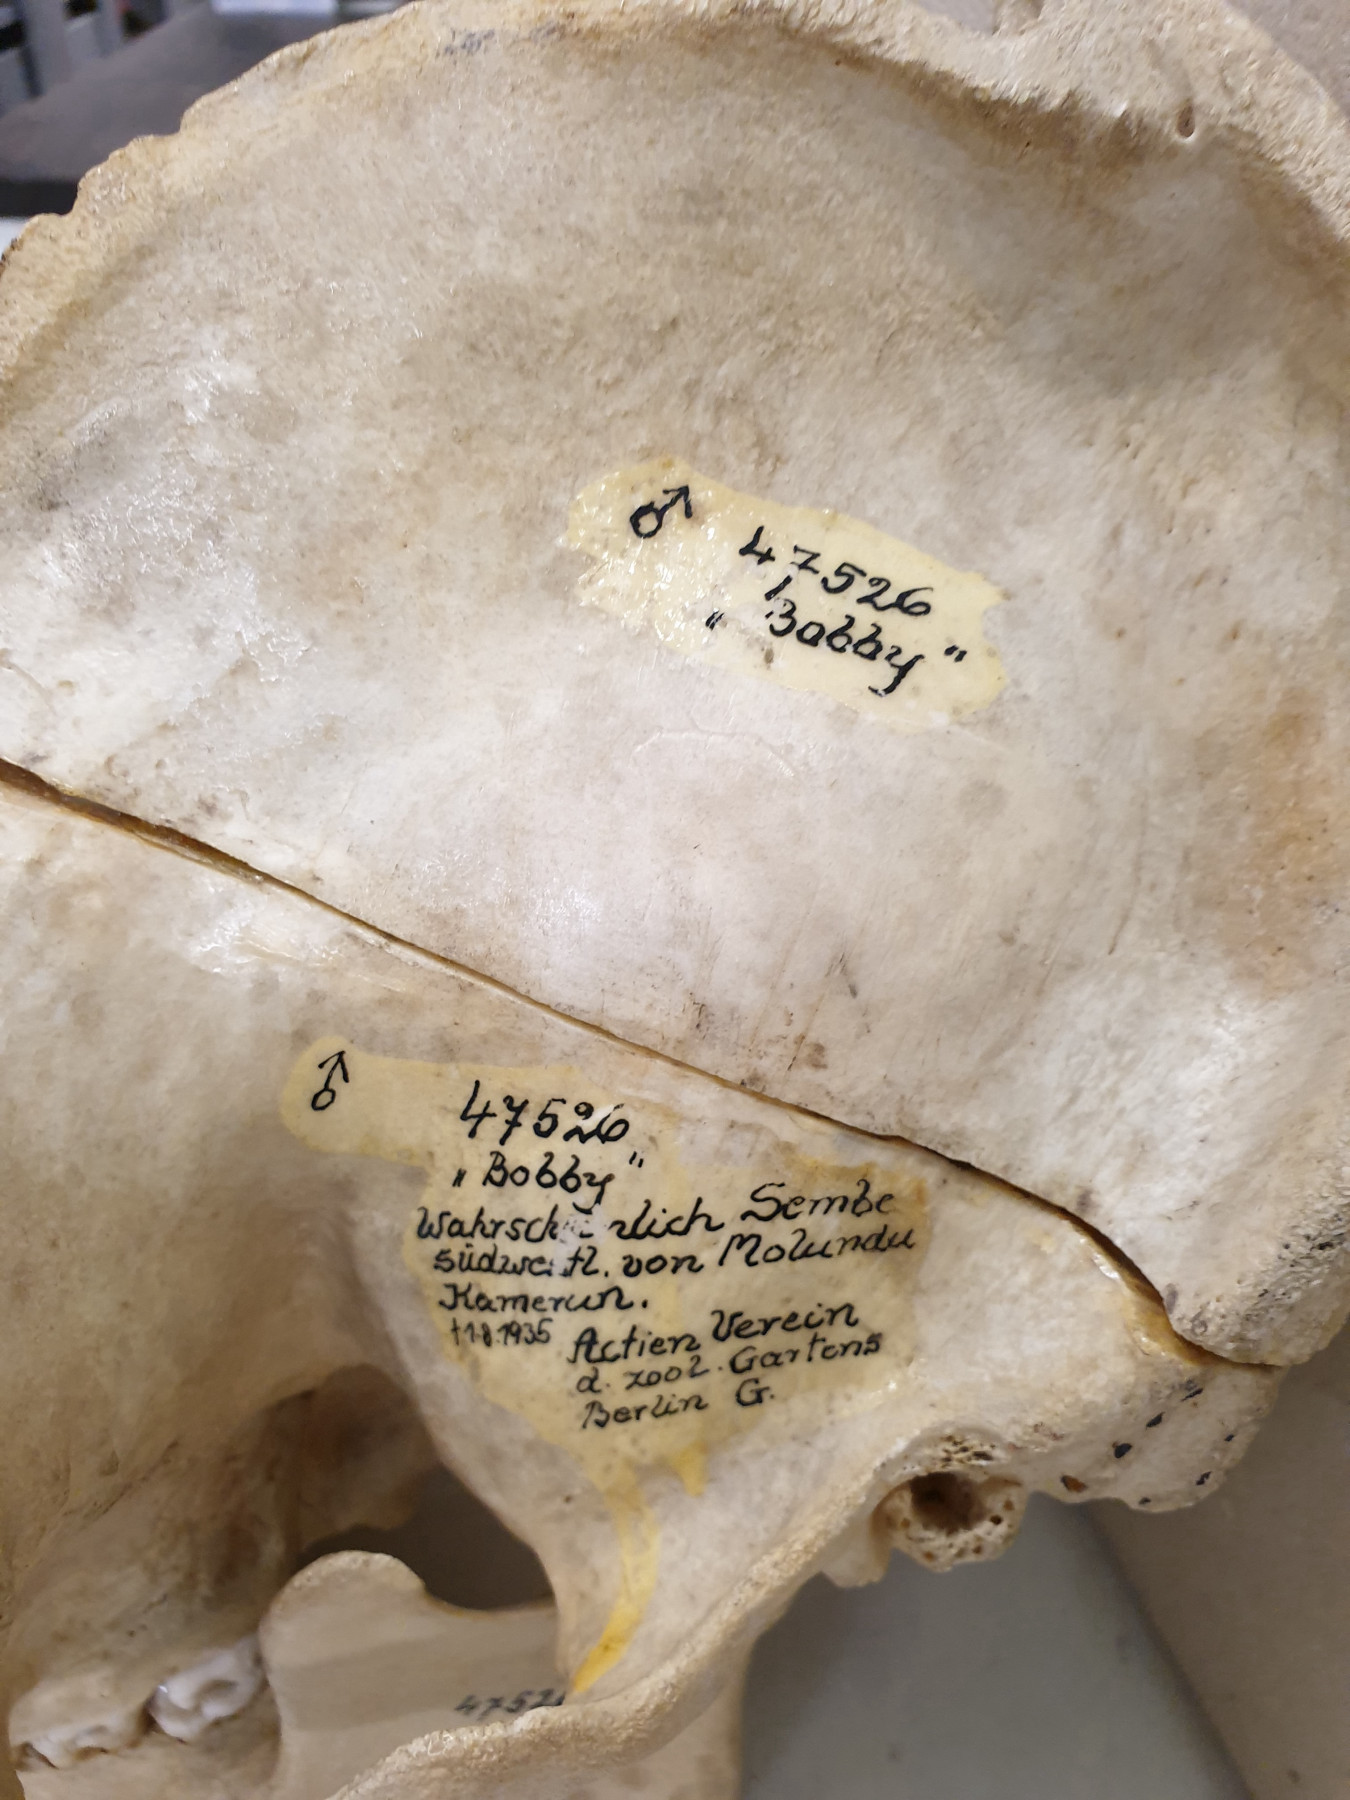 Enlarged section of a photograph revealing black writing on the sawn-through skull of a gorilla.